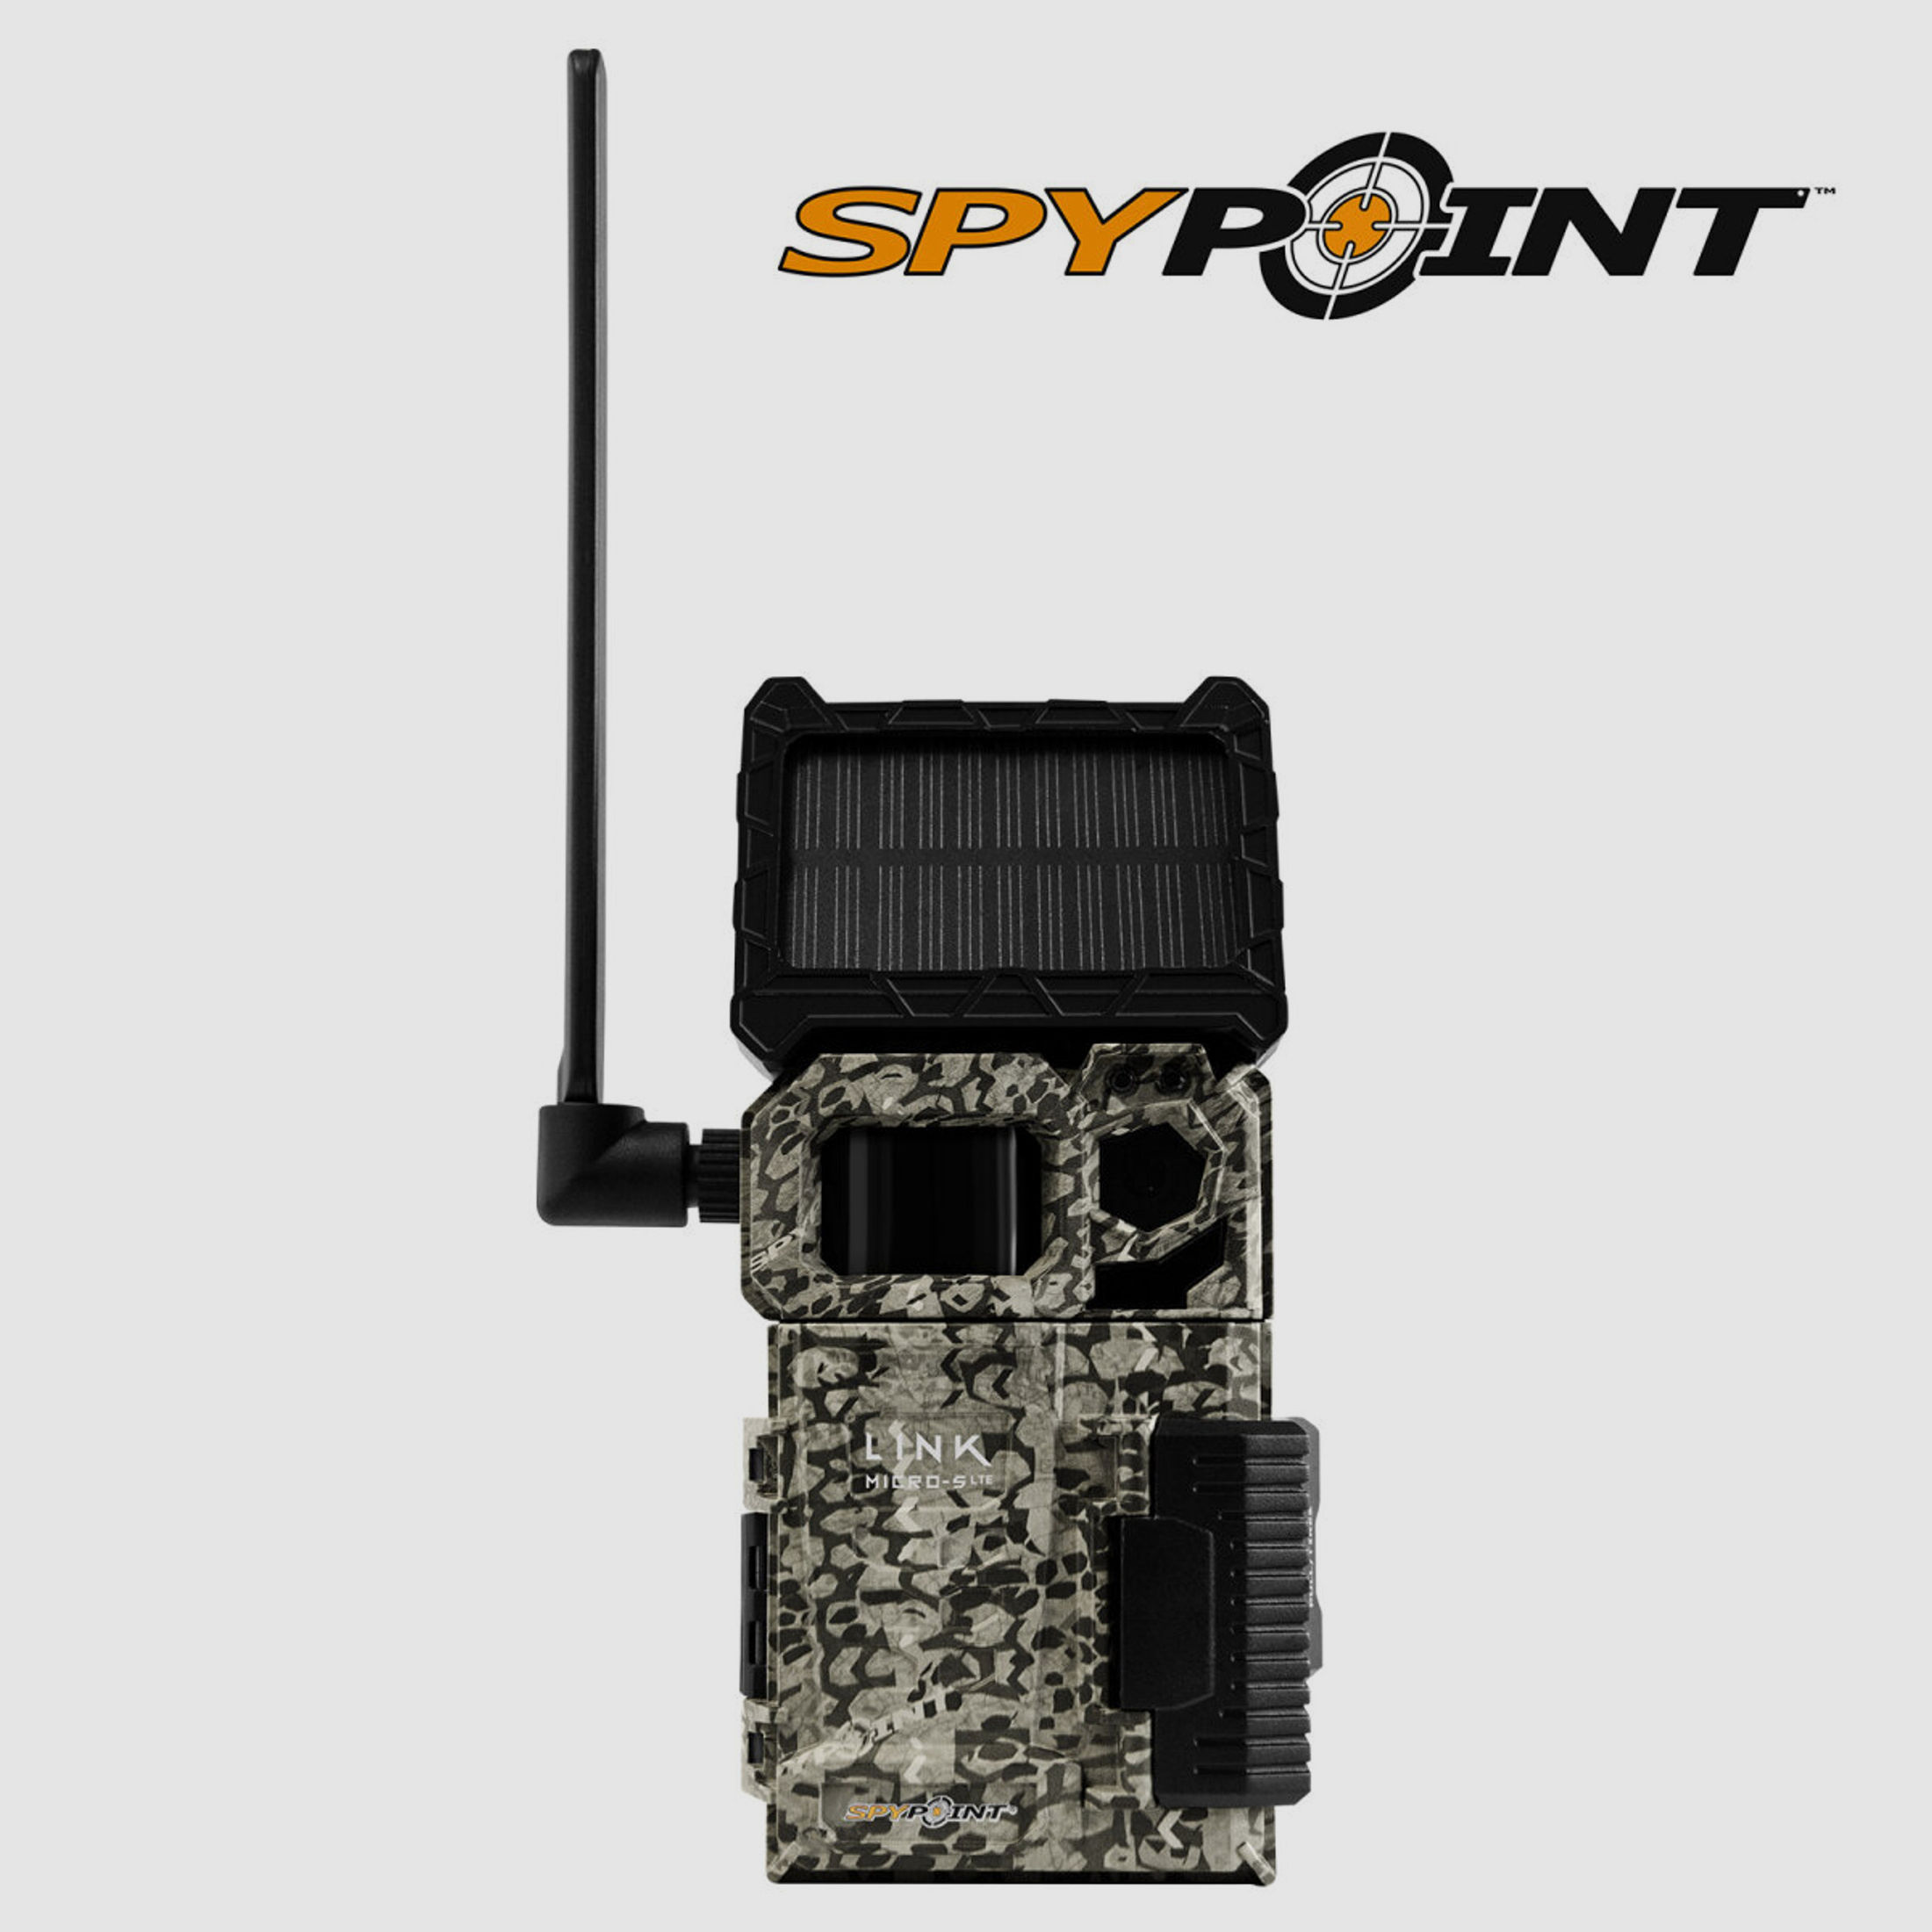 Spypoint Link Micro S LTE